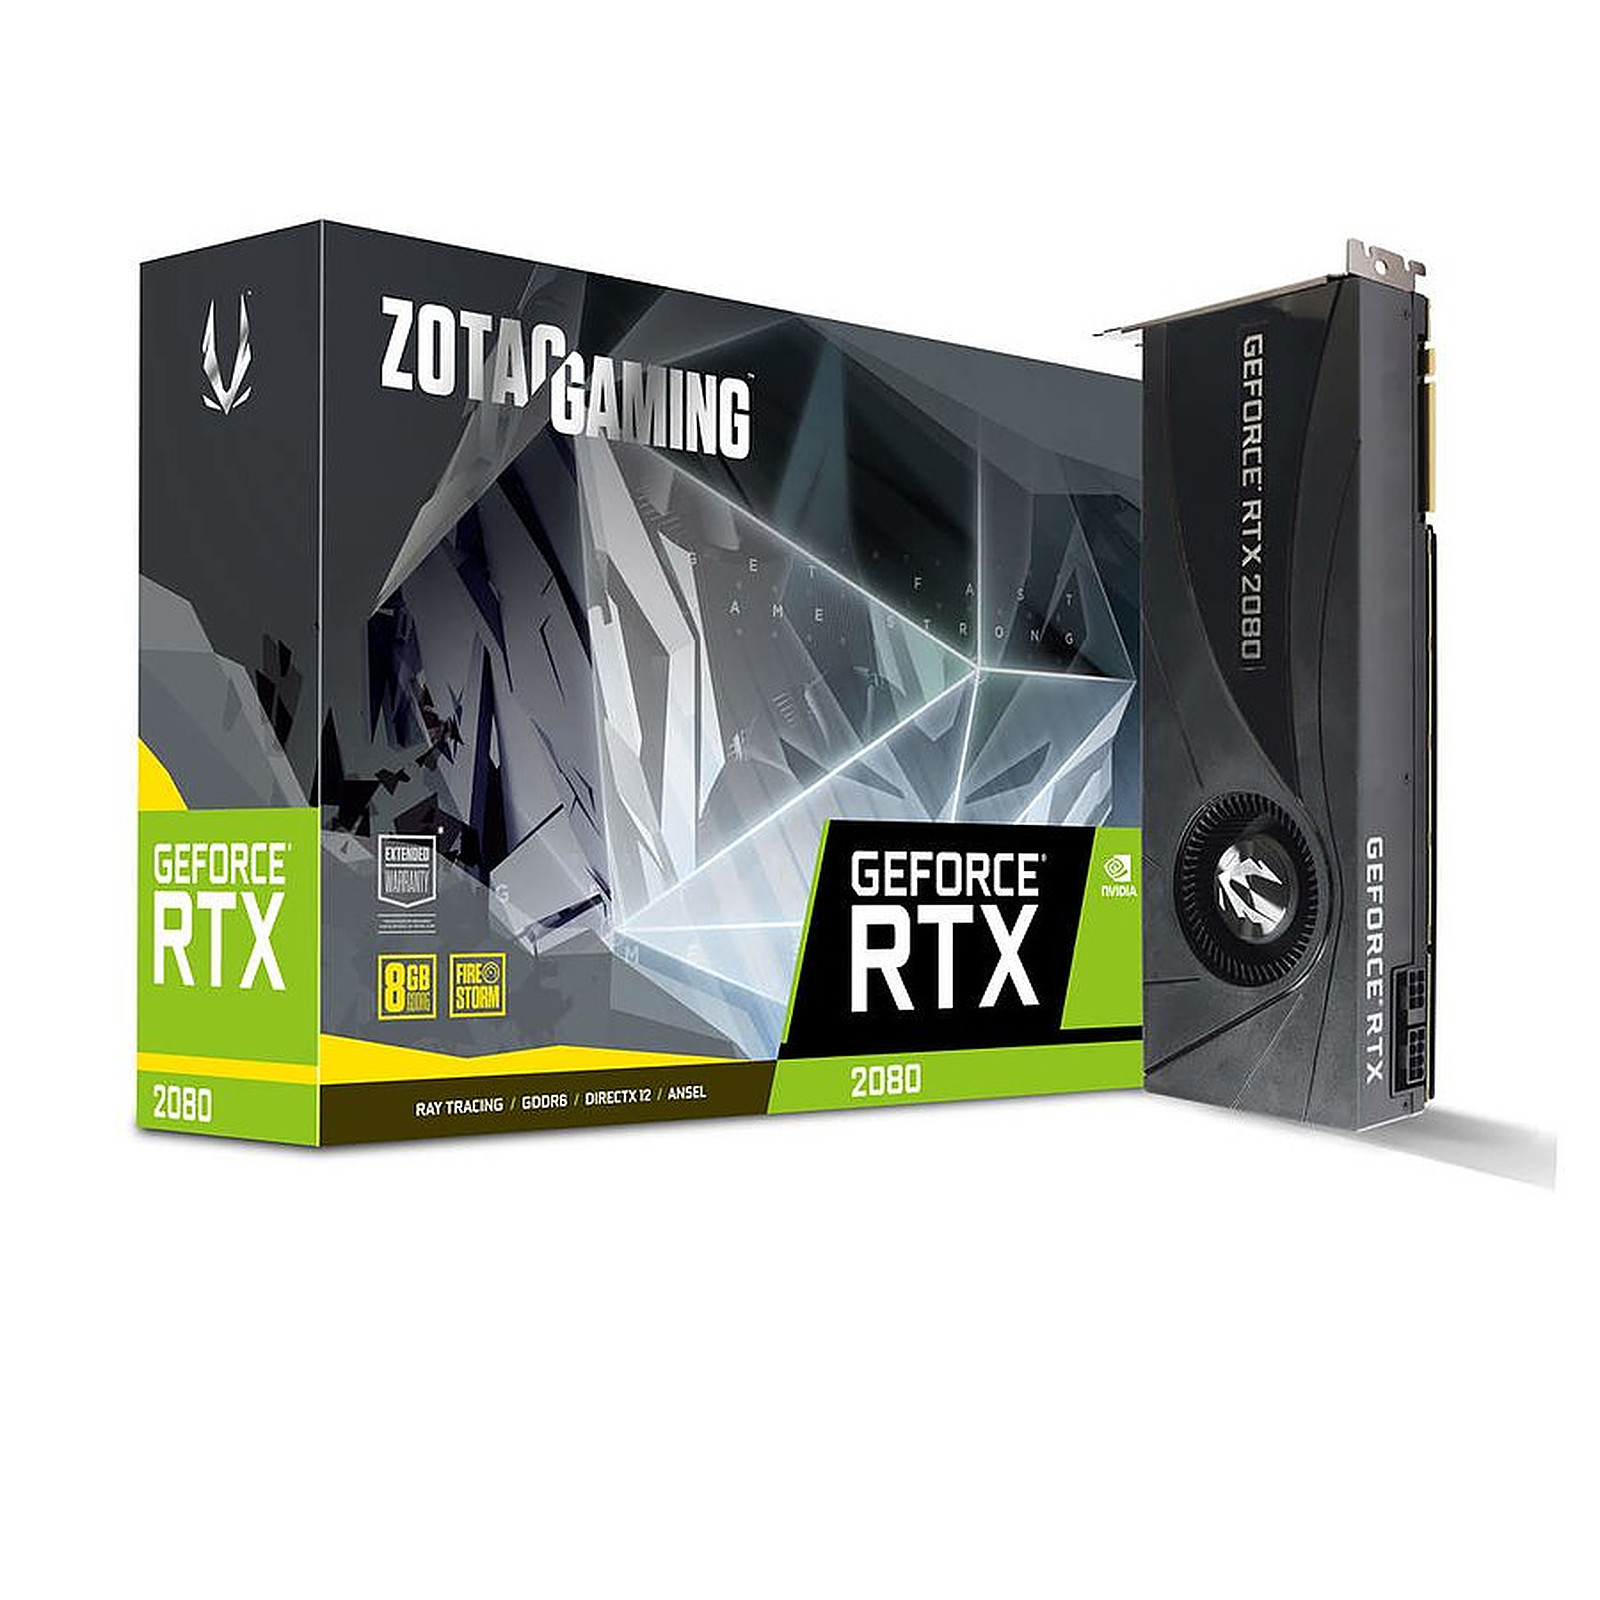 Zotac Geforce Rtx 2080 Blower Edition intended for dimensions 1600 X 1600